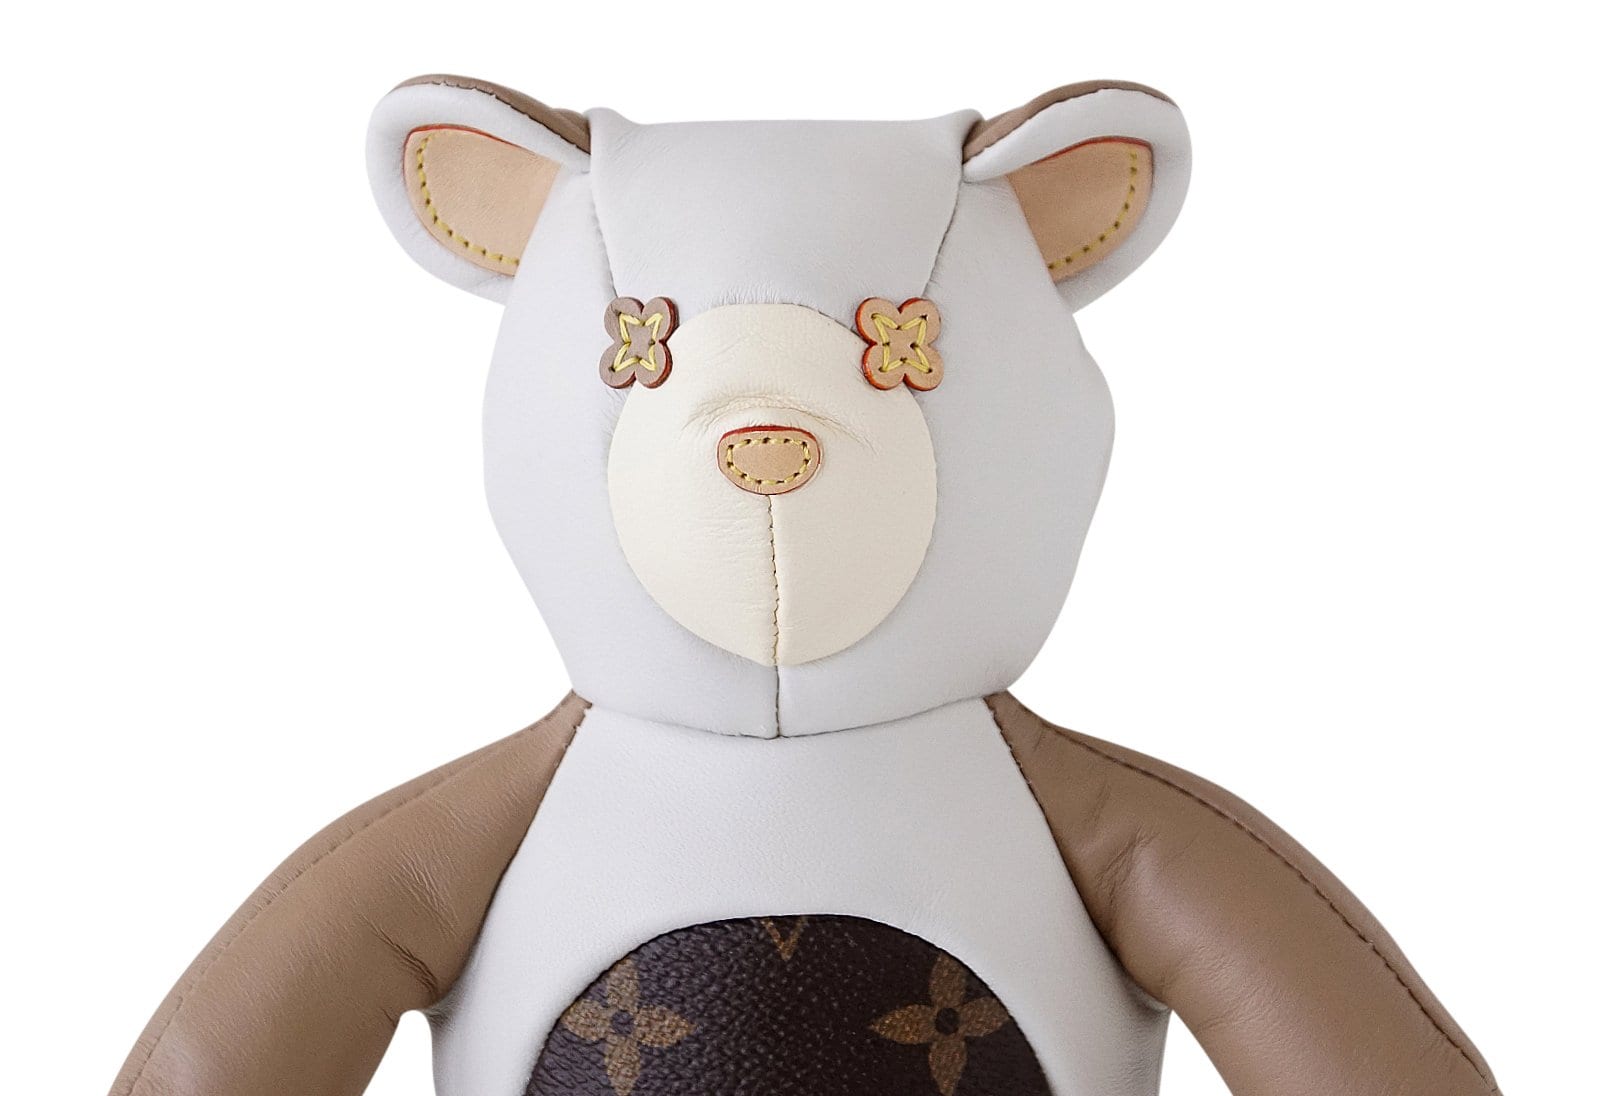 Brand New Louis Vuitton Collectible Teddy Bear DouDou For Sale at